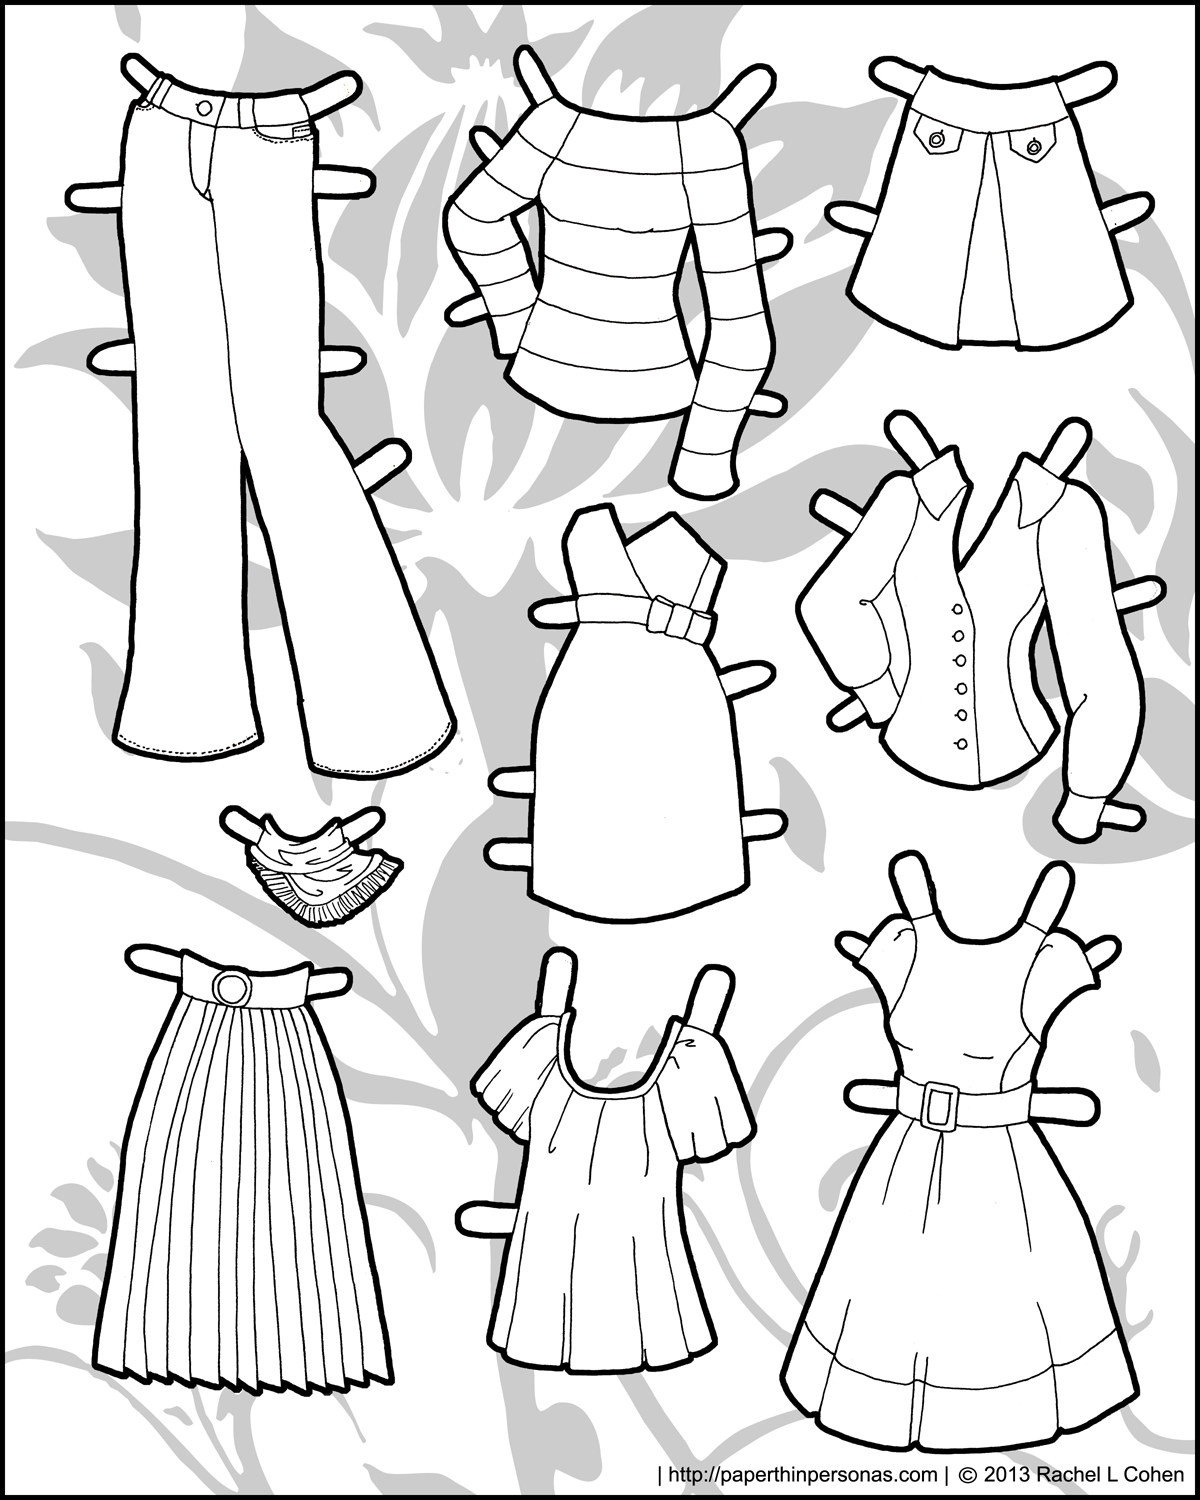 And yet more clothing for the Ms Mannequin Printable Paper Dolls Paper Thin Personas Paper